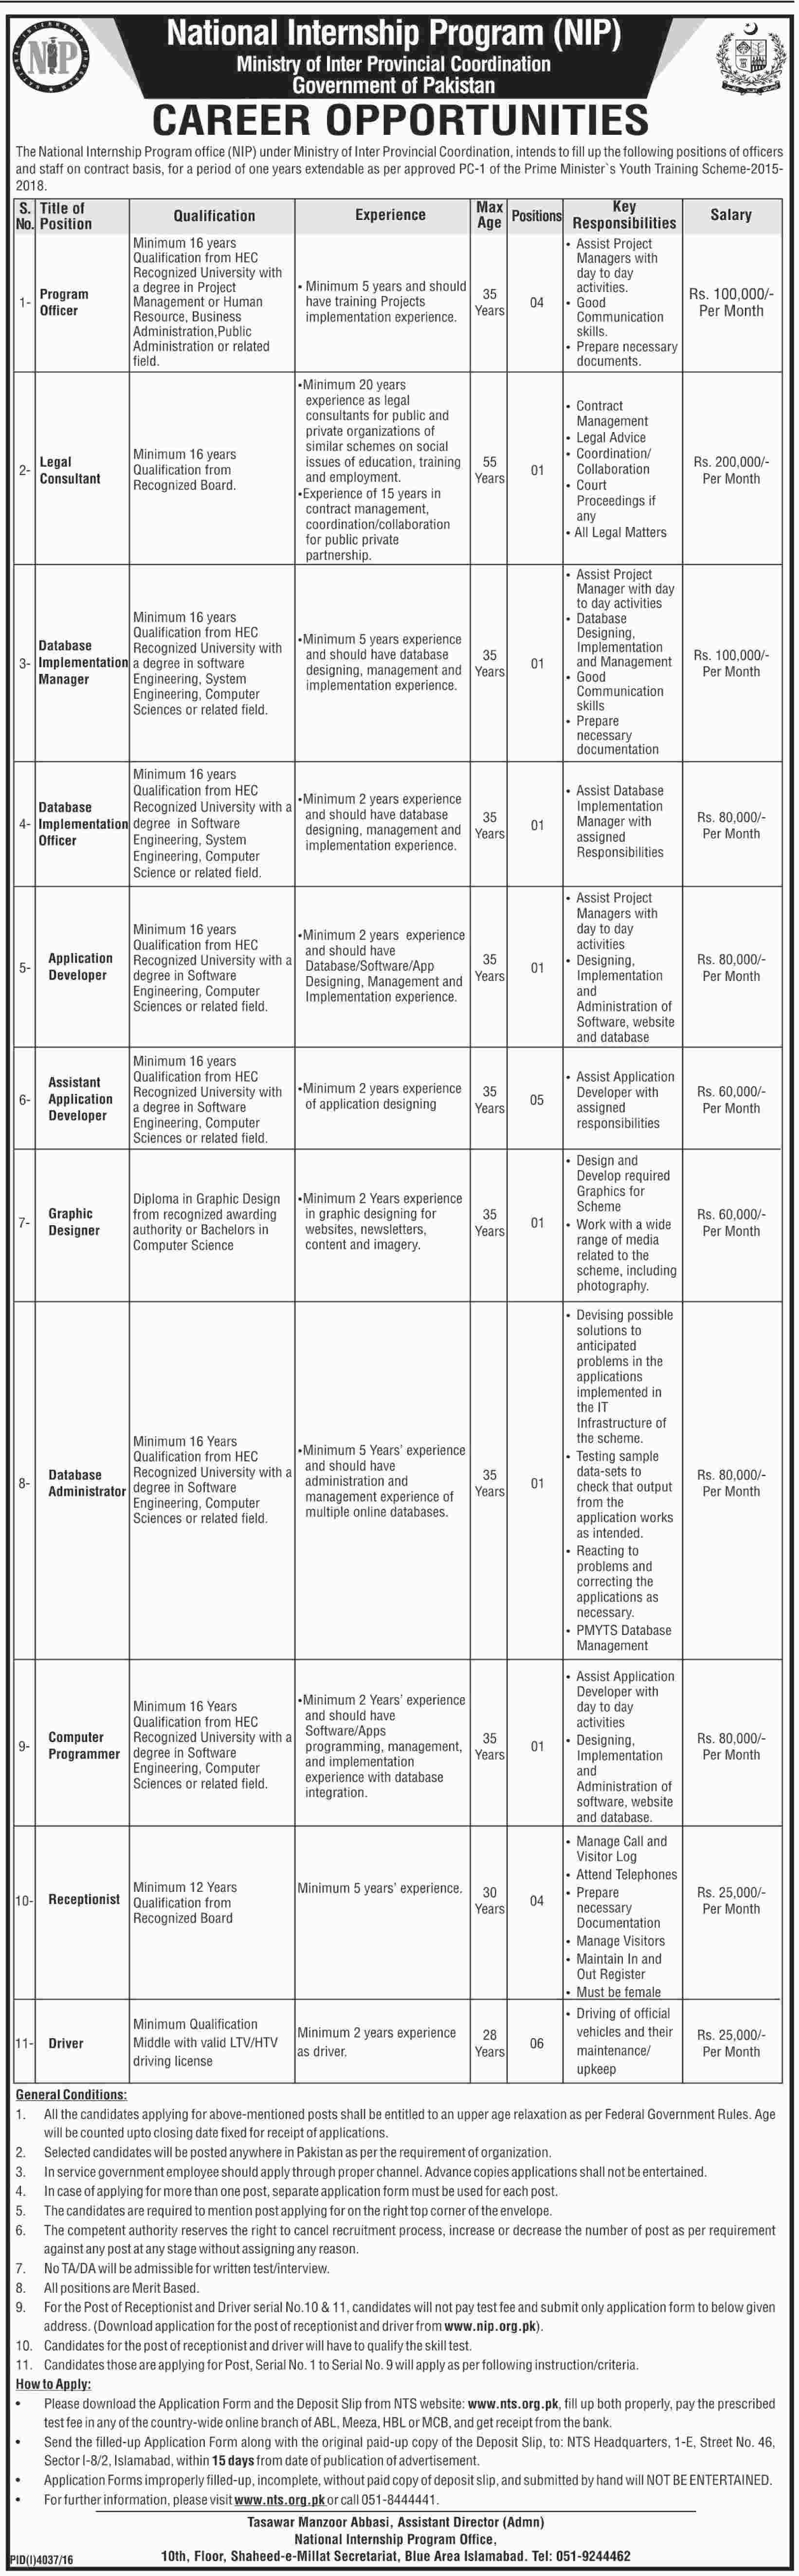 Jobs in National Intership Program NIP 2017 Form, Test Date and roll no slips